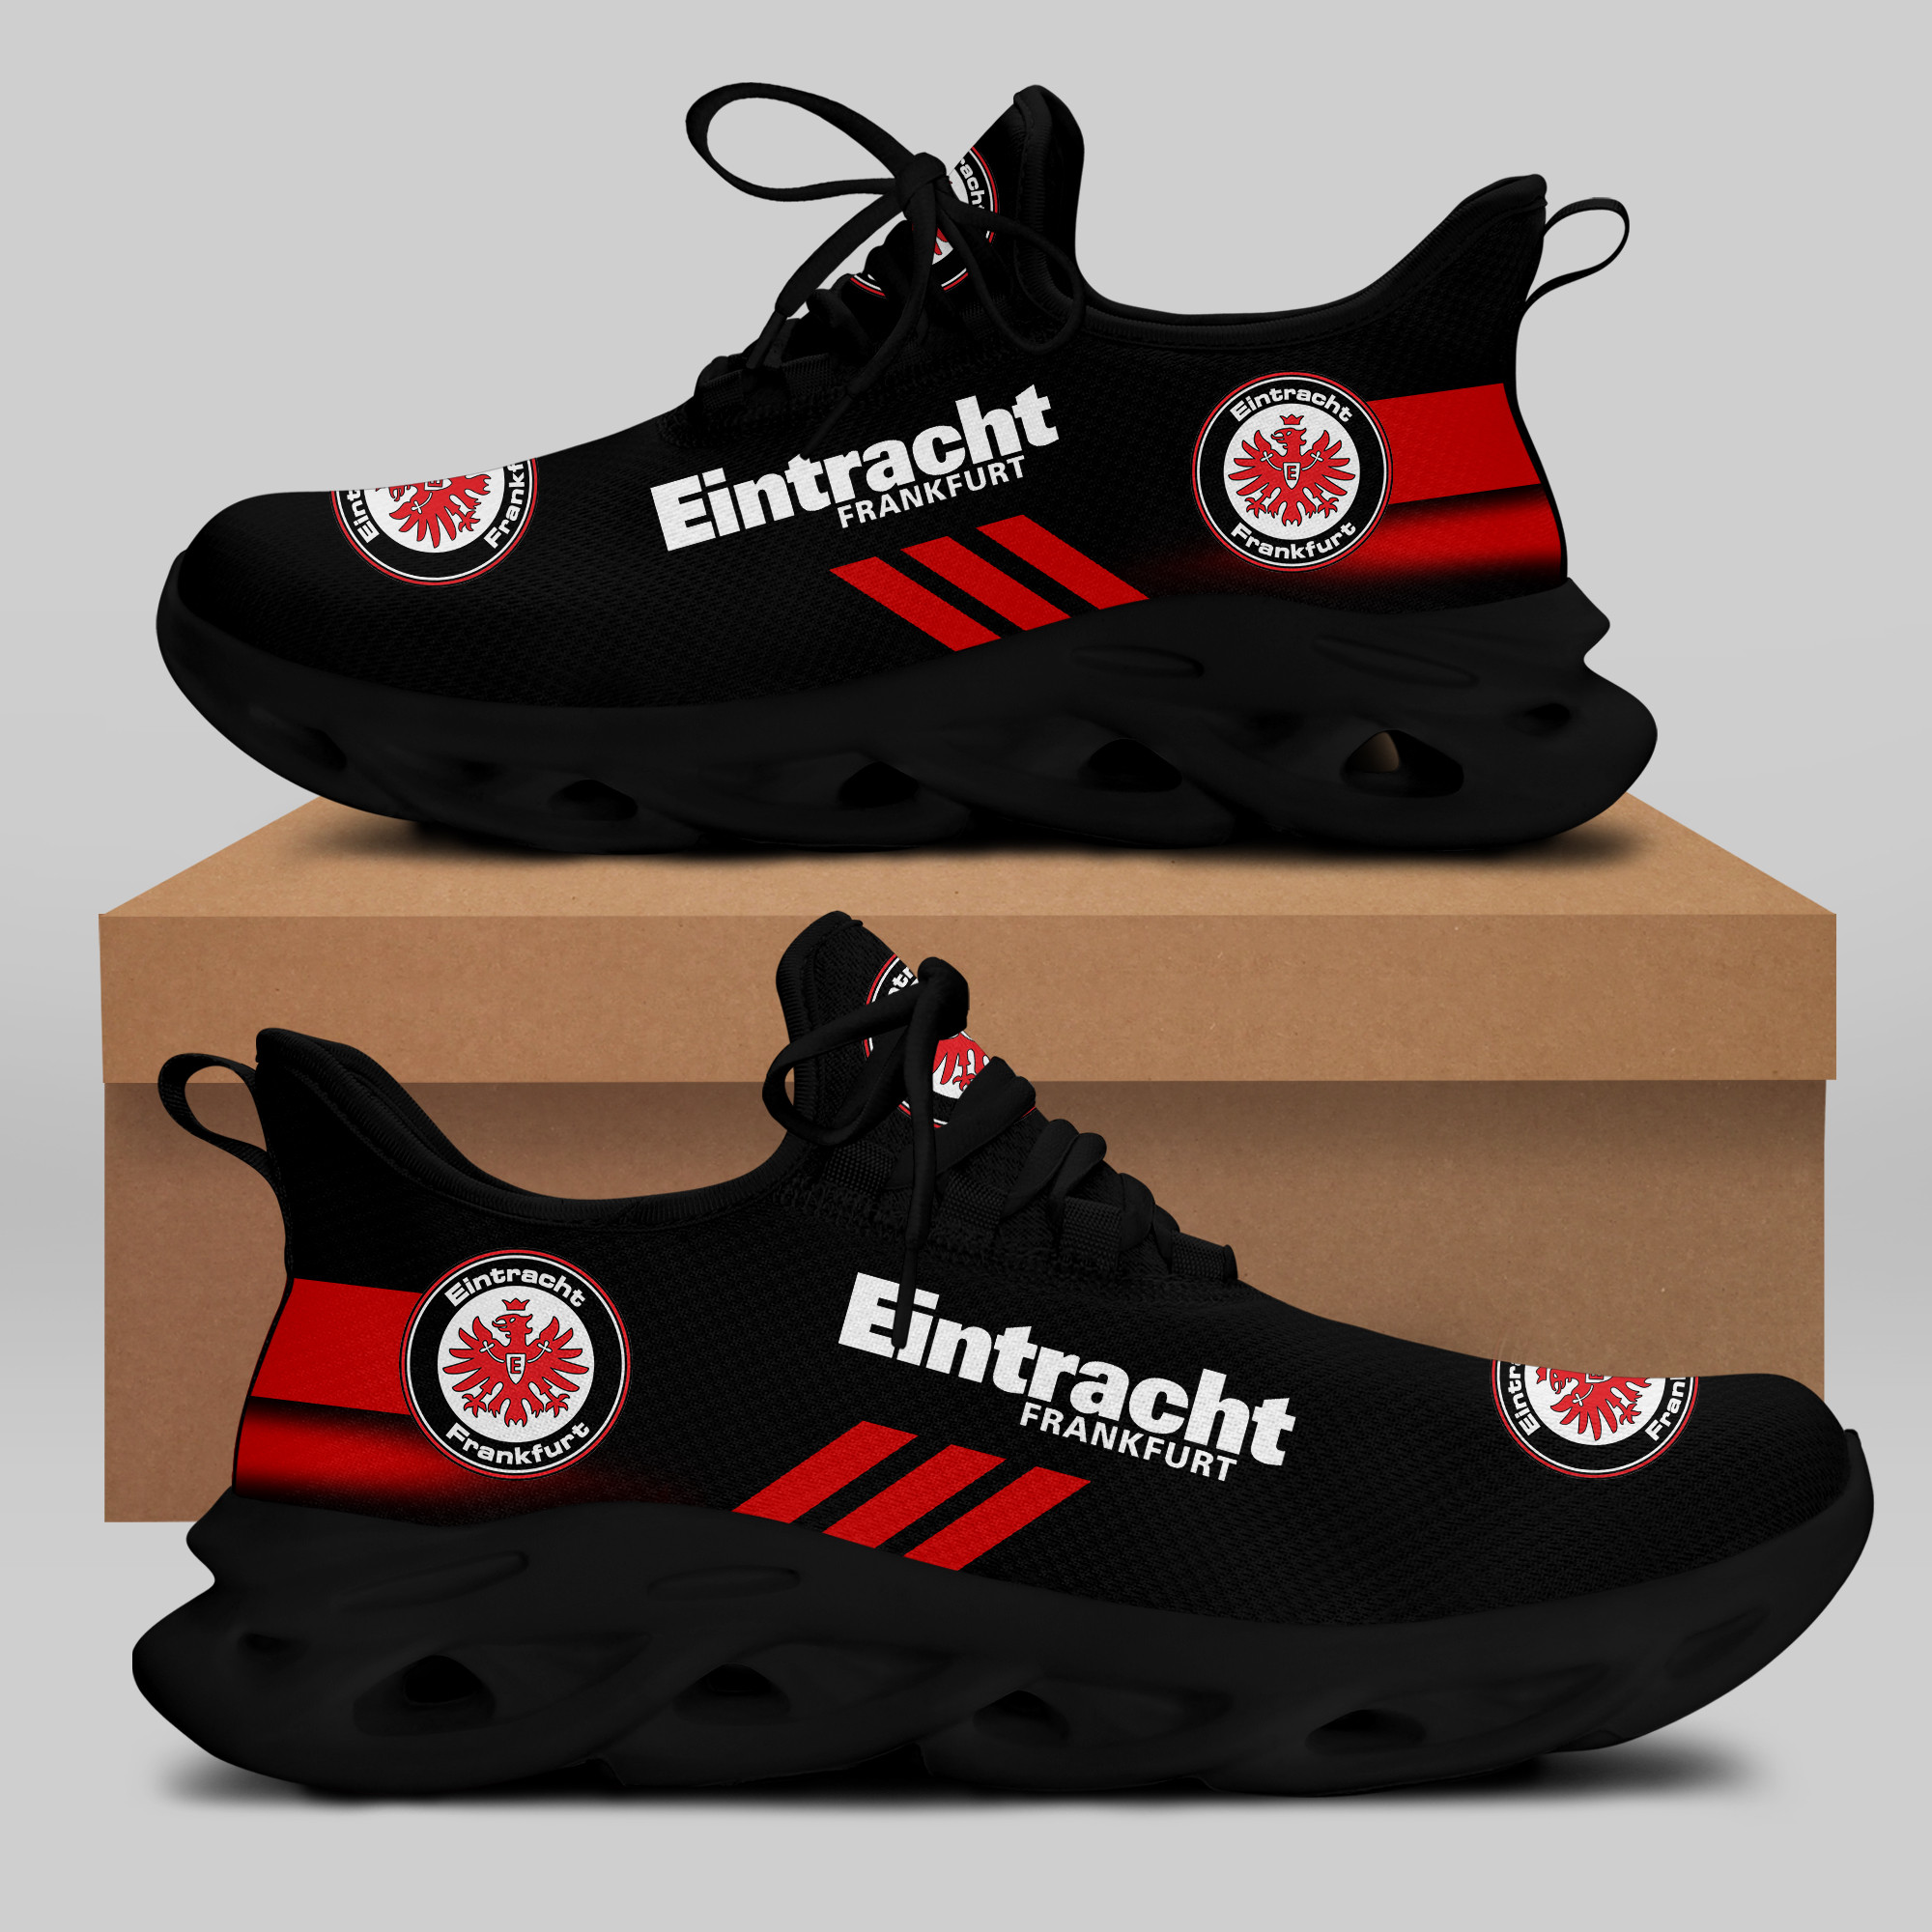 HOT Eintracht Frankfurt Blacks Clunky Max Soul Sneakers Shoes2